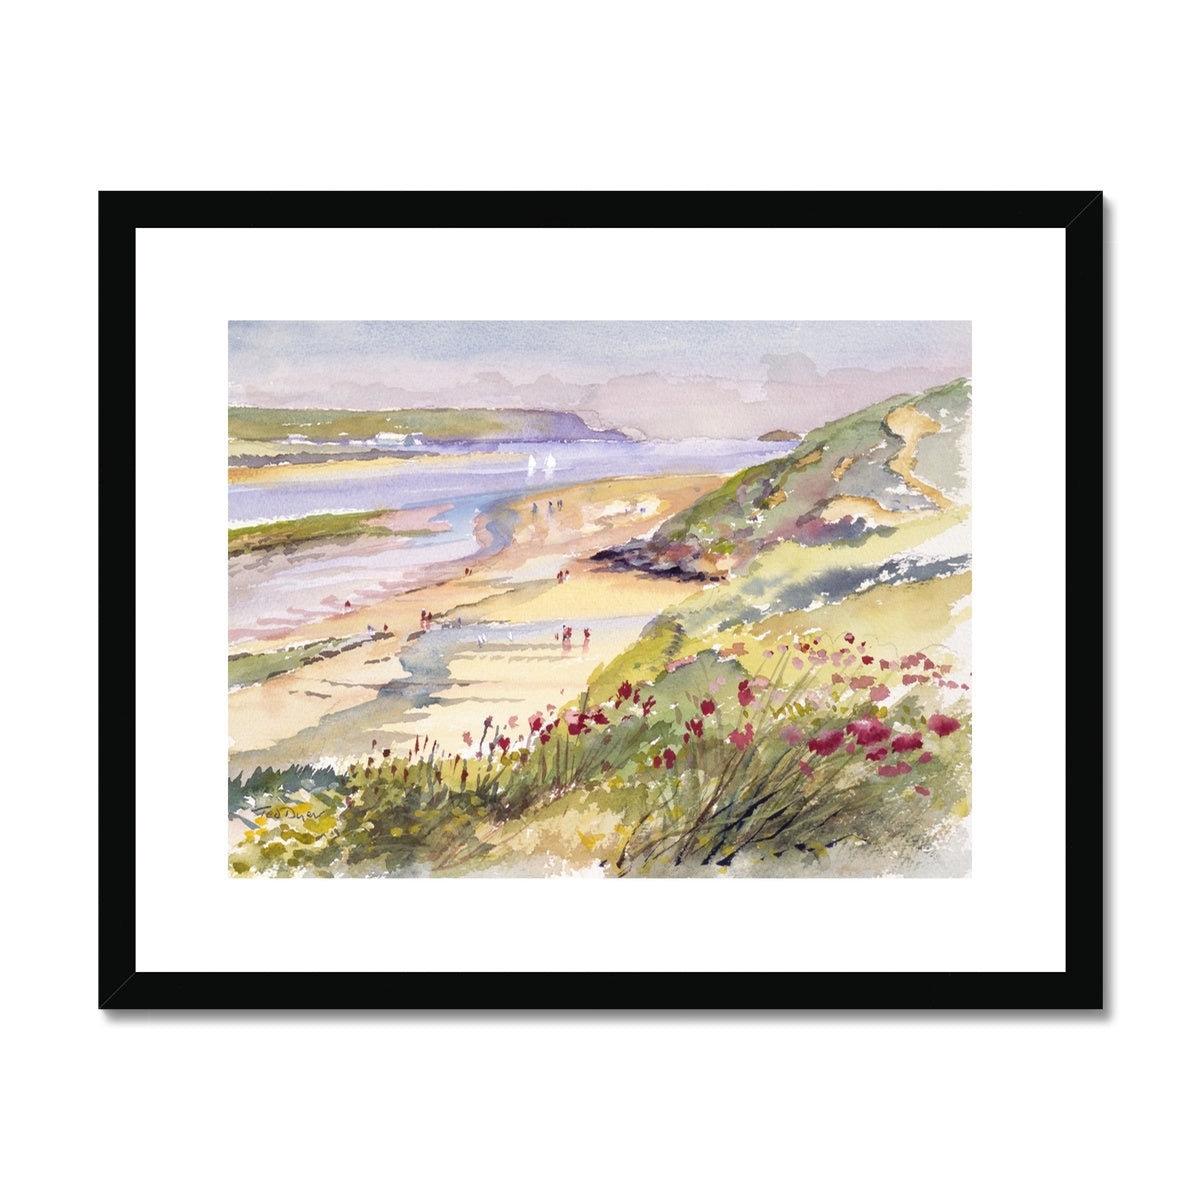 Ted Dyer Framed Open Edition Cornish Fine Art Print. 'View of the Camel Estuary and Dayer Bay from Rock'. Cornwall Art Gallery